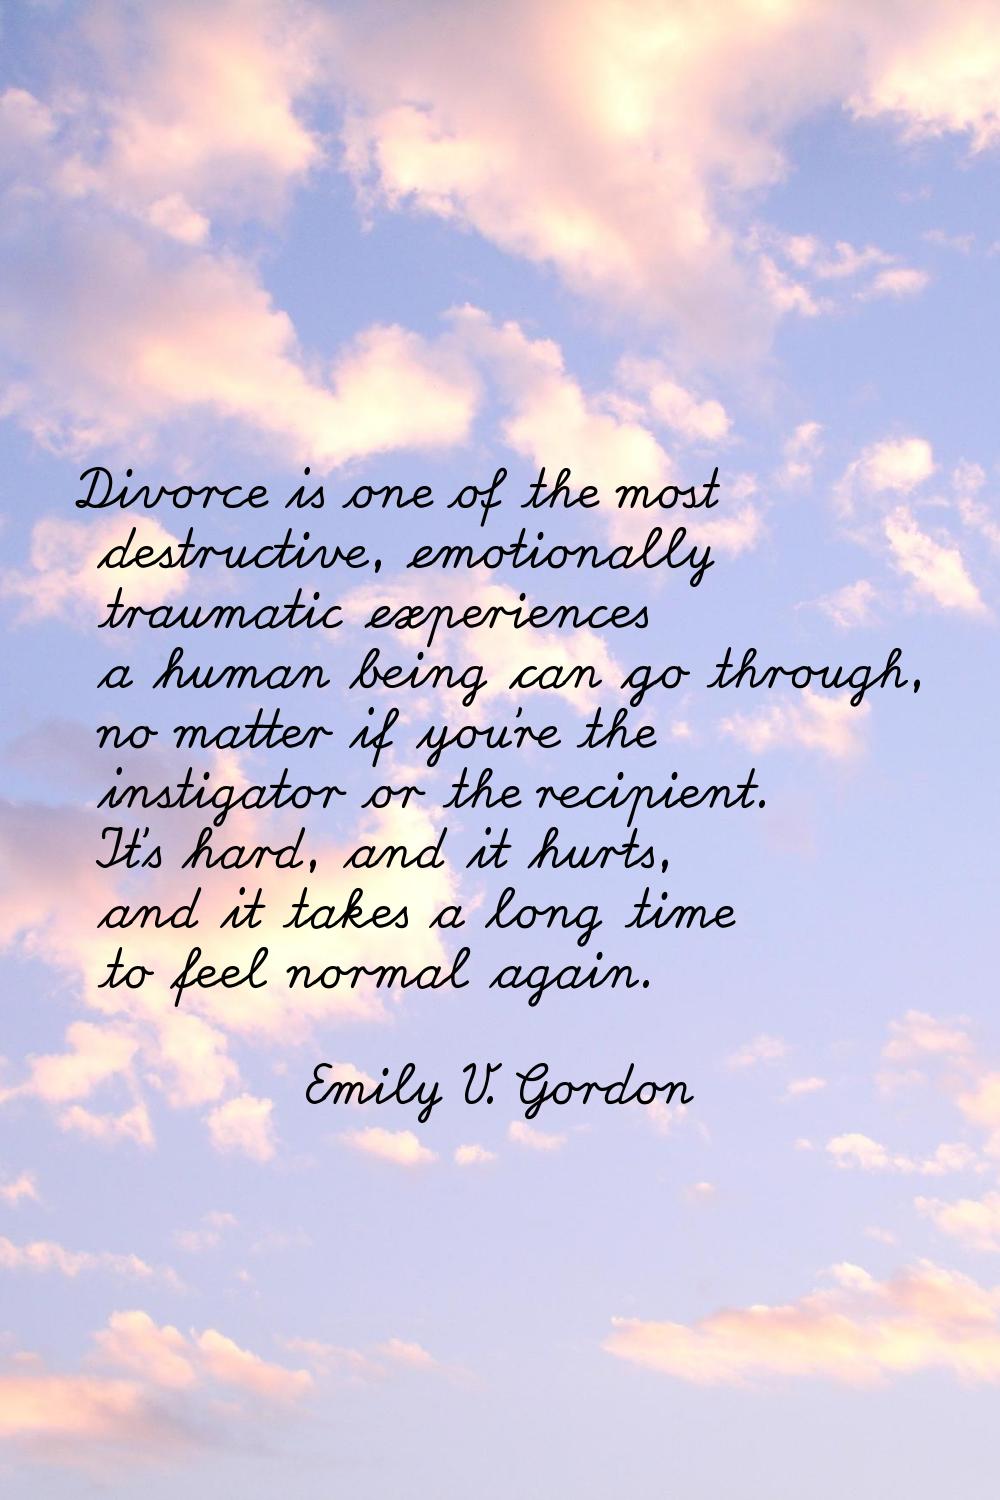 Divorce is one of the most destructive, emotionally traumatic experiences a human being can go thro